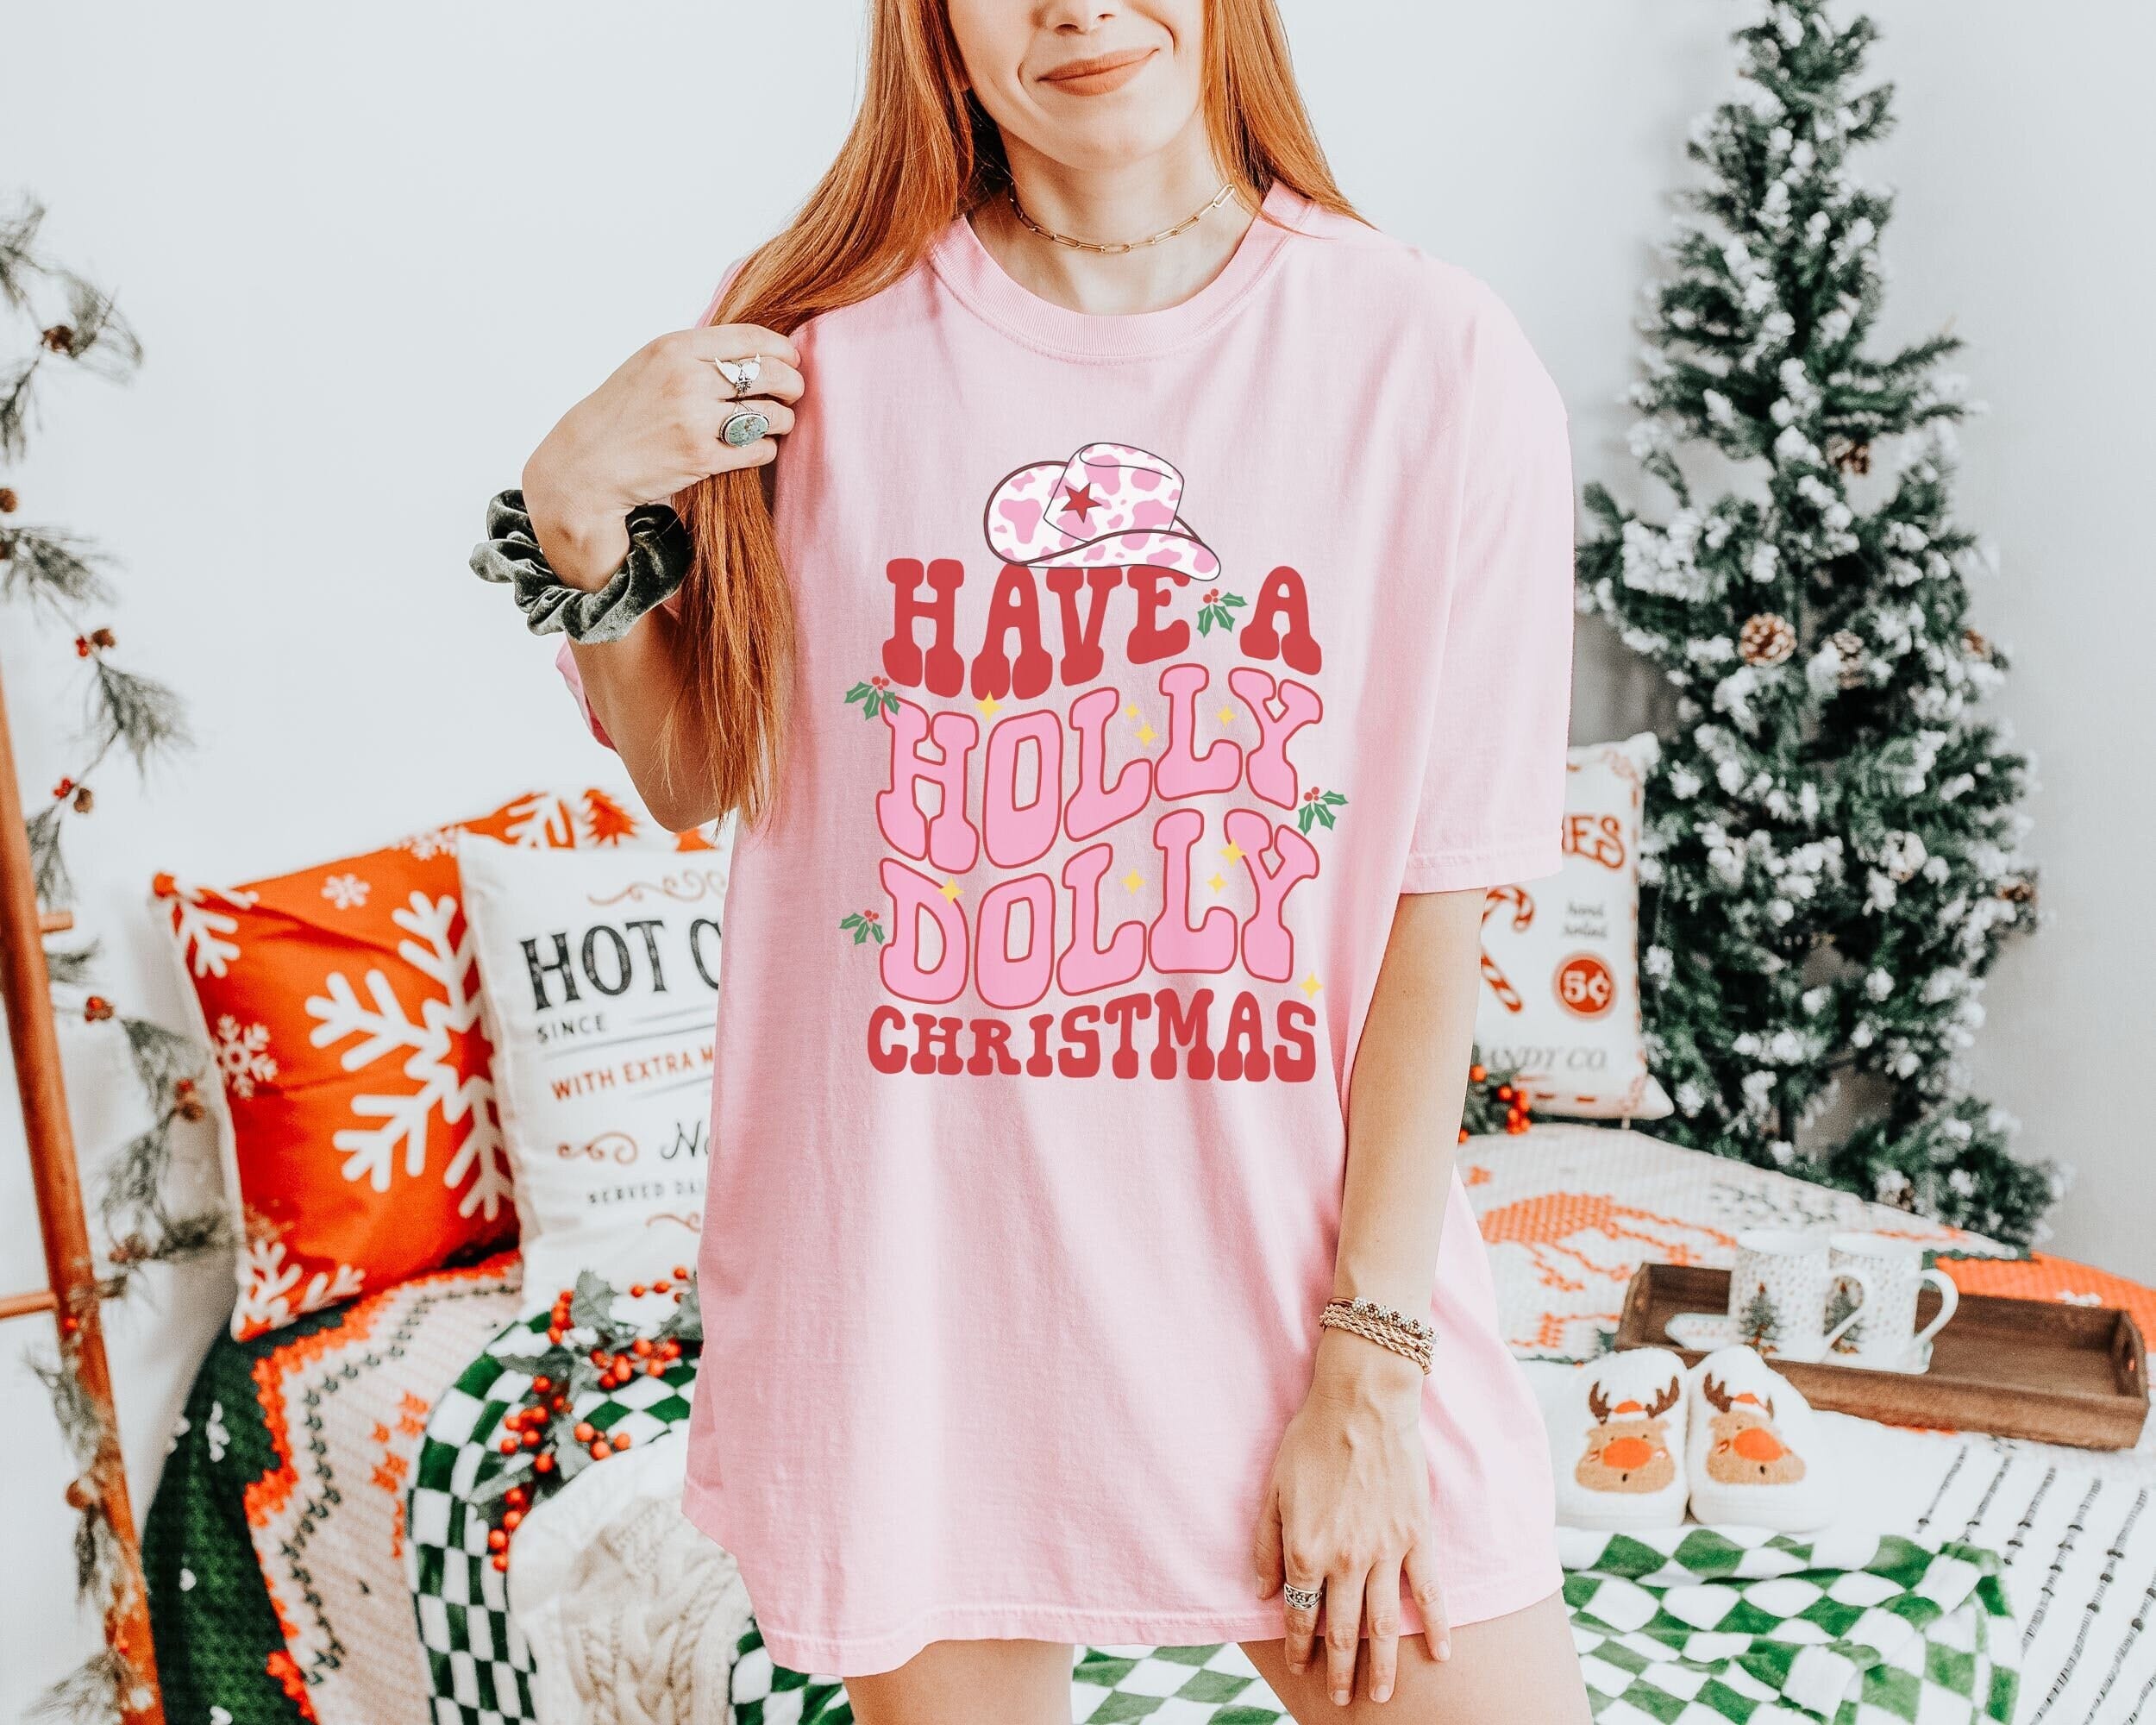 Holly Dolly Christmas Shirt Oversized Pink Western Xmas Tee Western Christmas Comfort Colors Shirt Country Christmas Gift for Friend